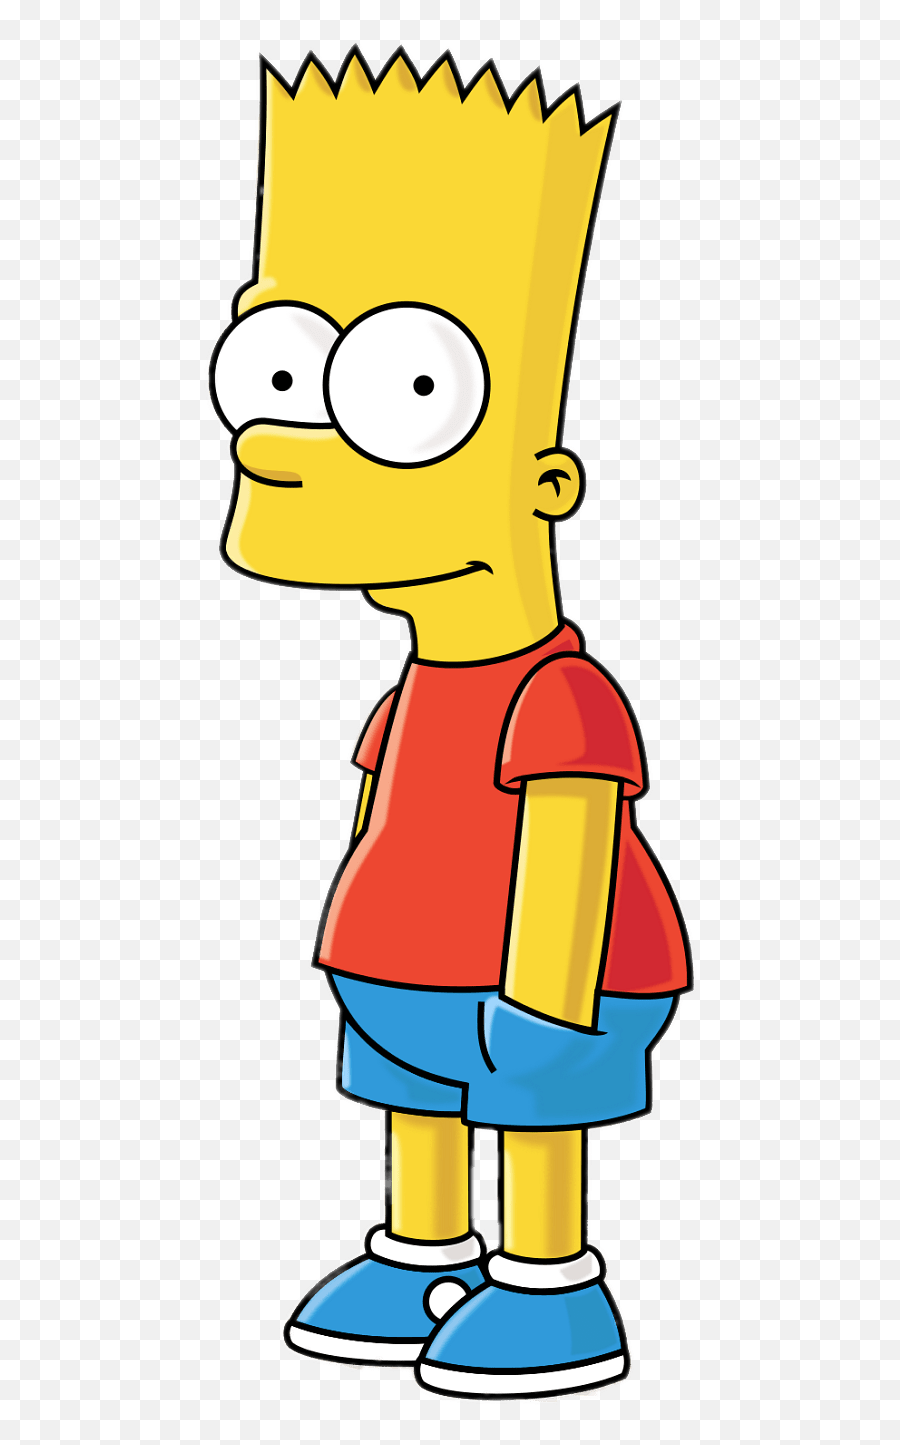 Check Out This Transparent Bart Simpson - Bart Simpson Hands In Pocket Emoji,Bart Simpson Transparent